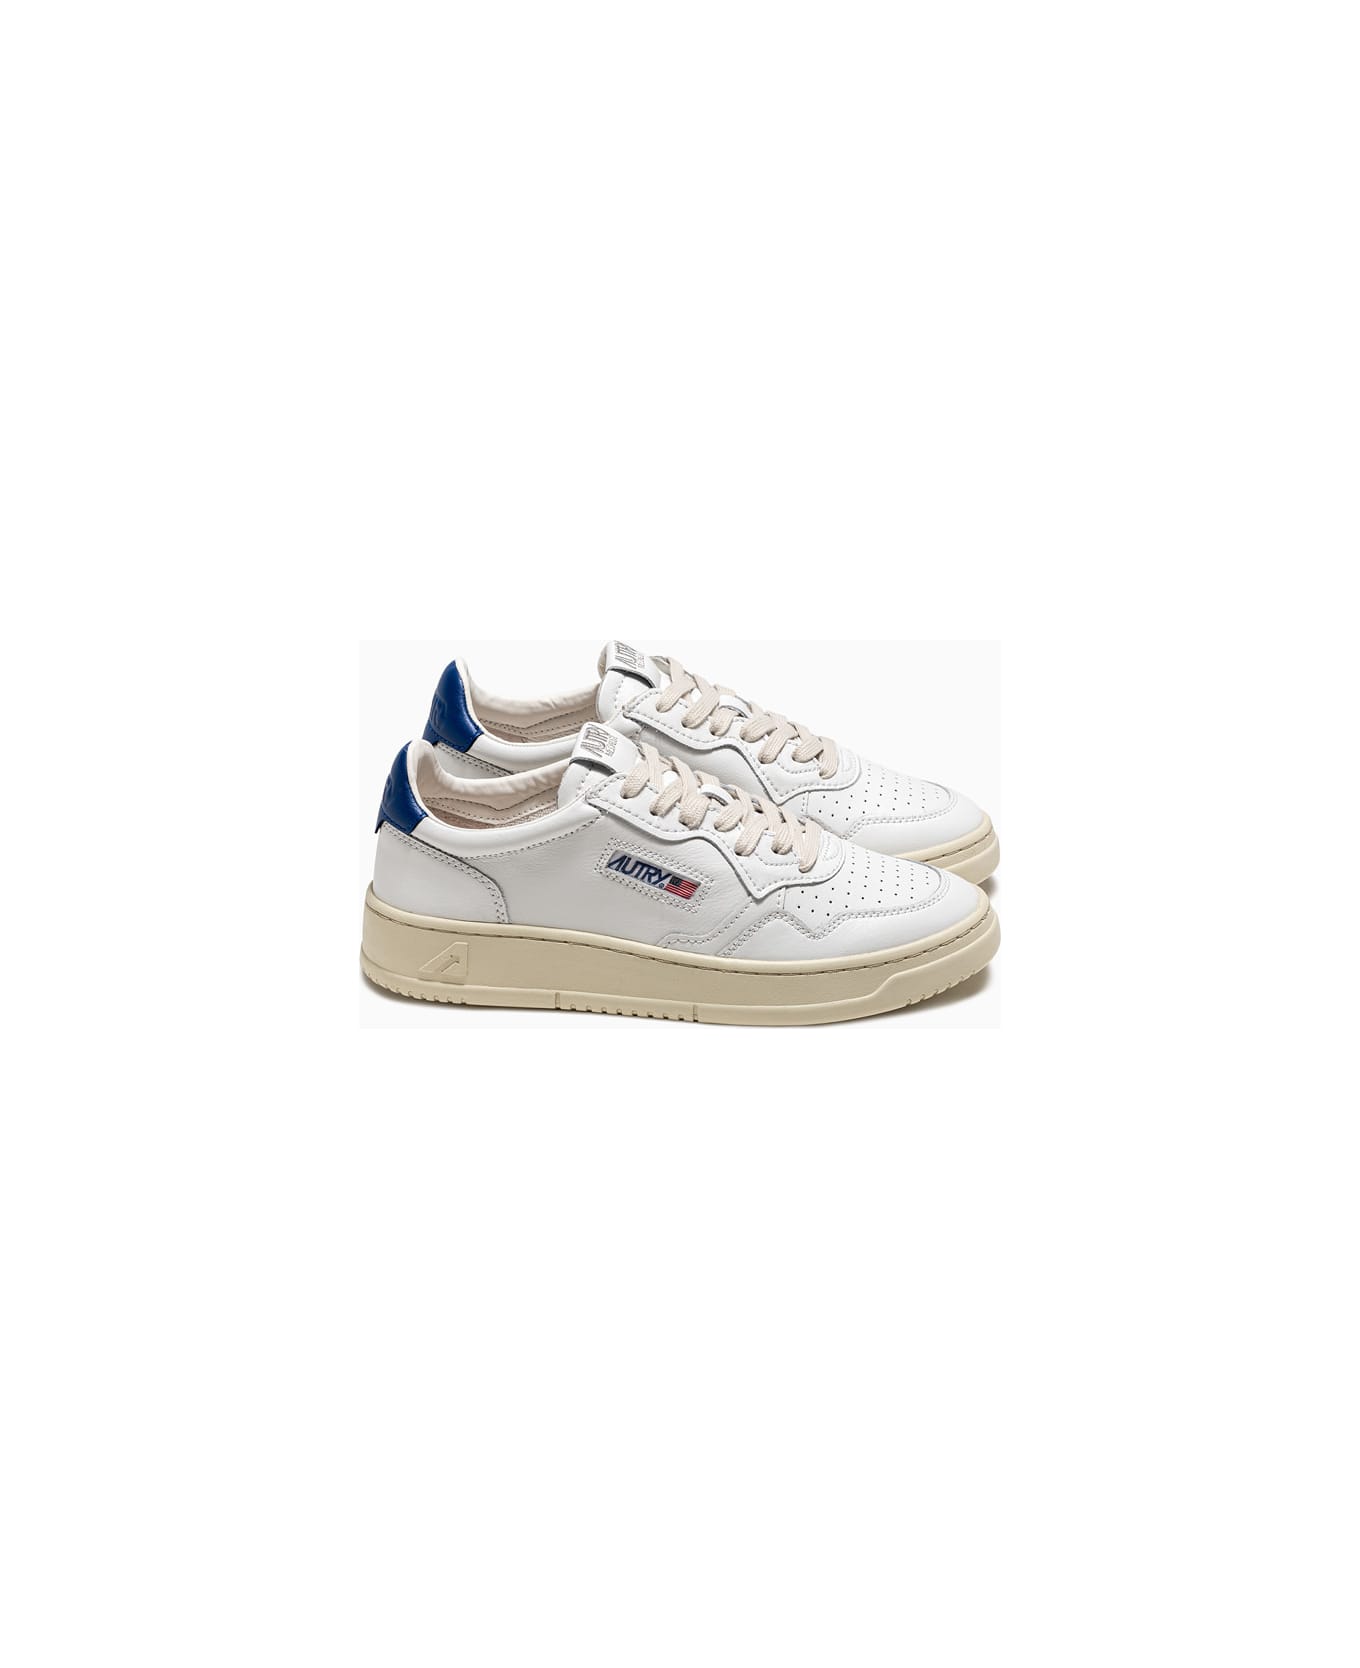 Autry Low Aulum Ll12 Sneakers - White